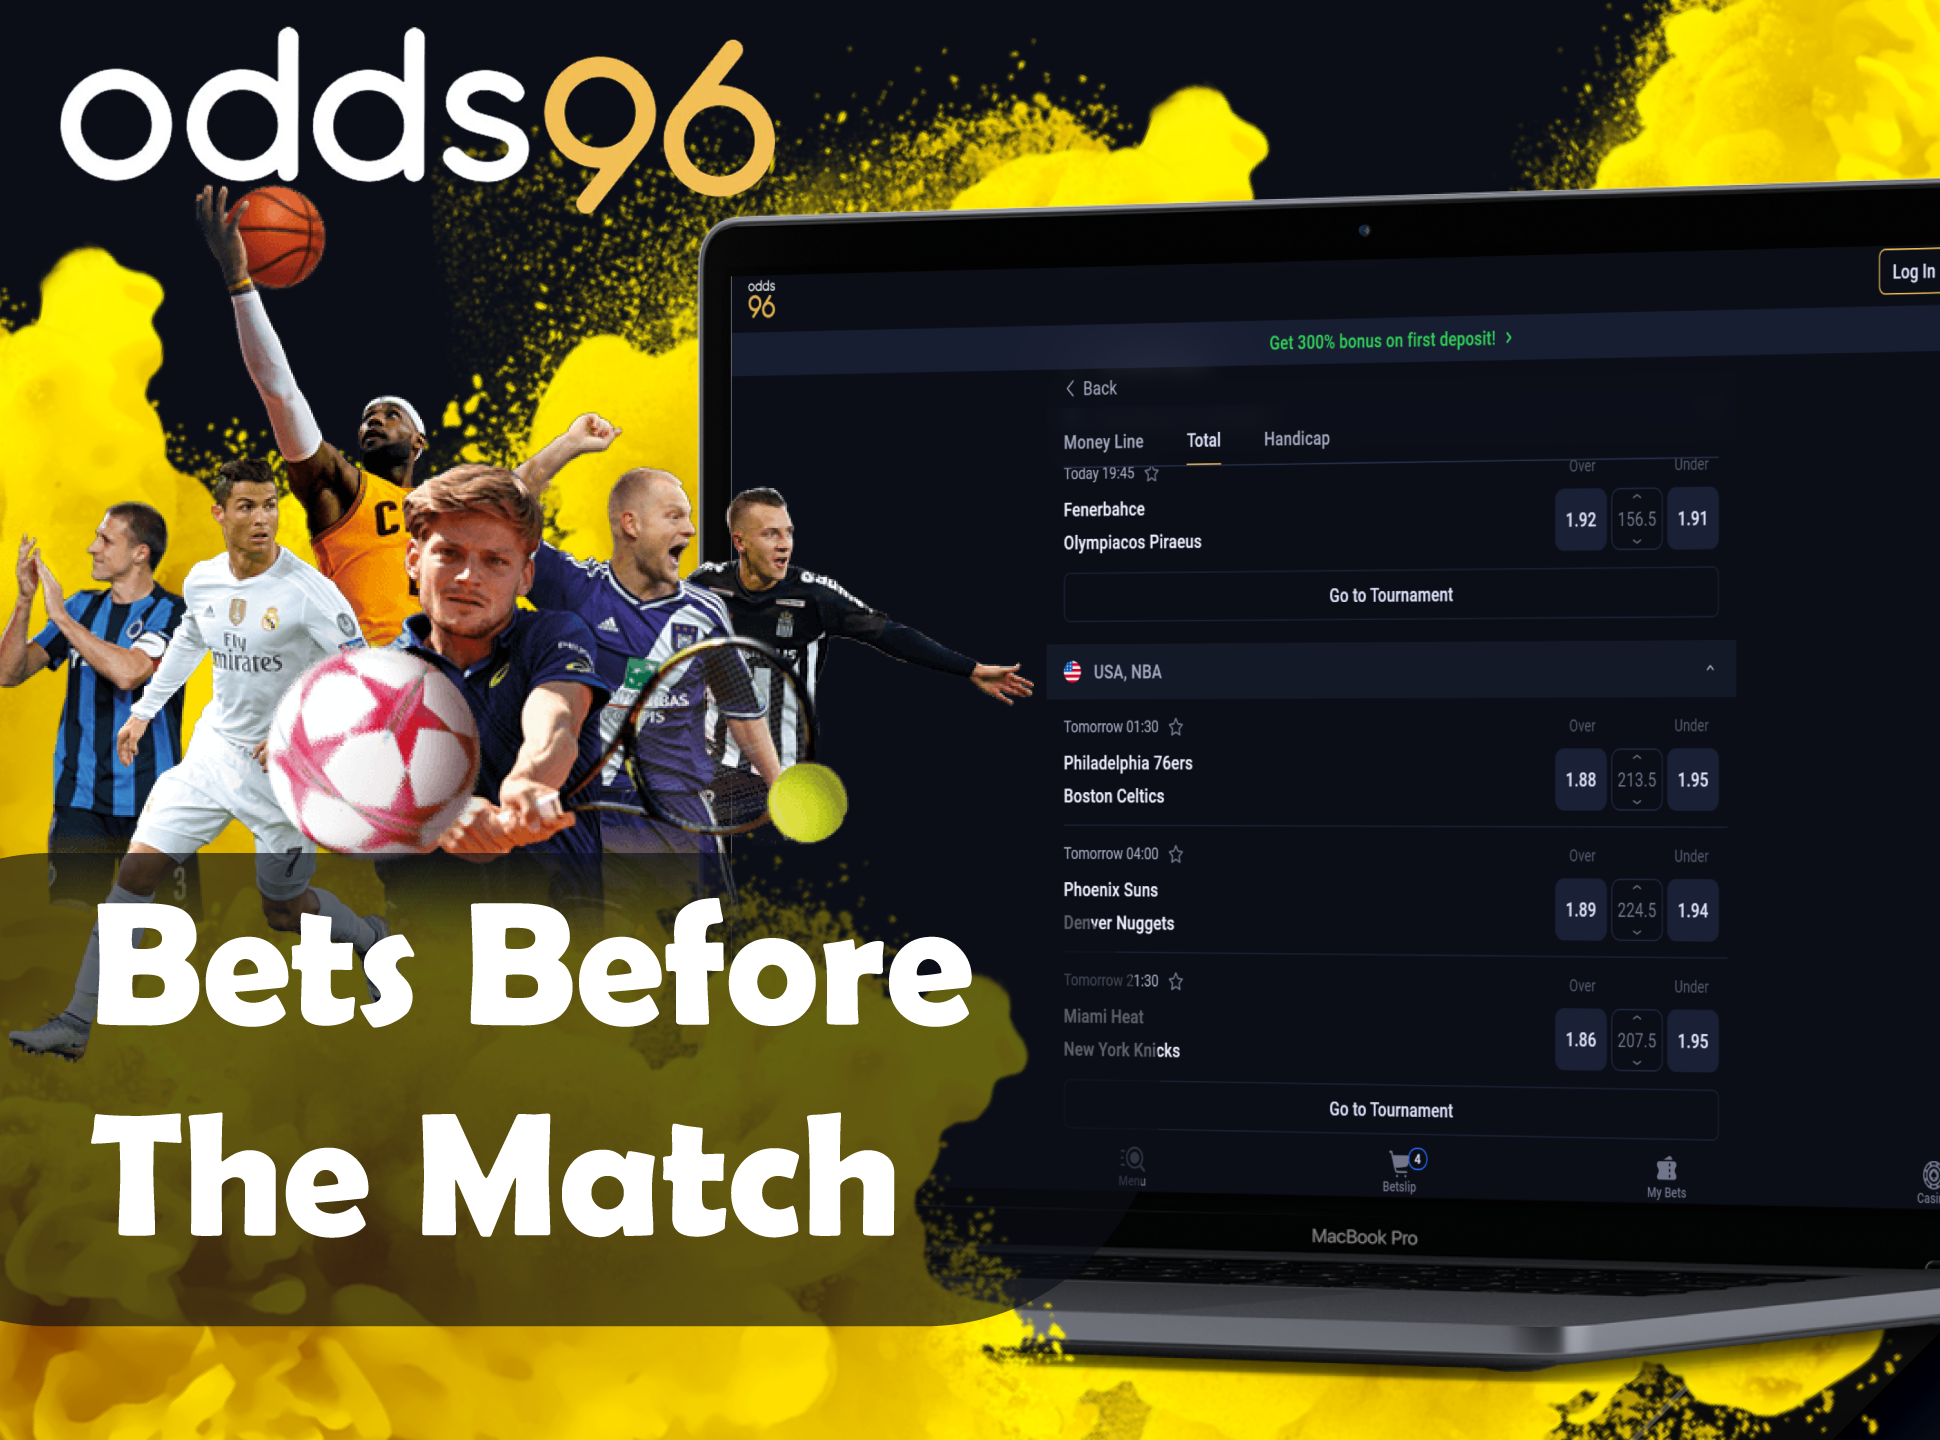 Make prematch bets and wait for result at Odds96.